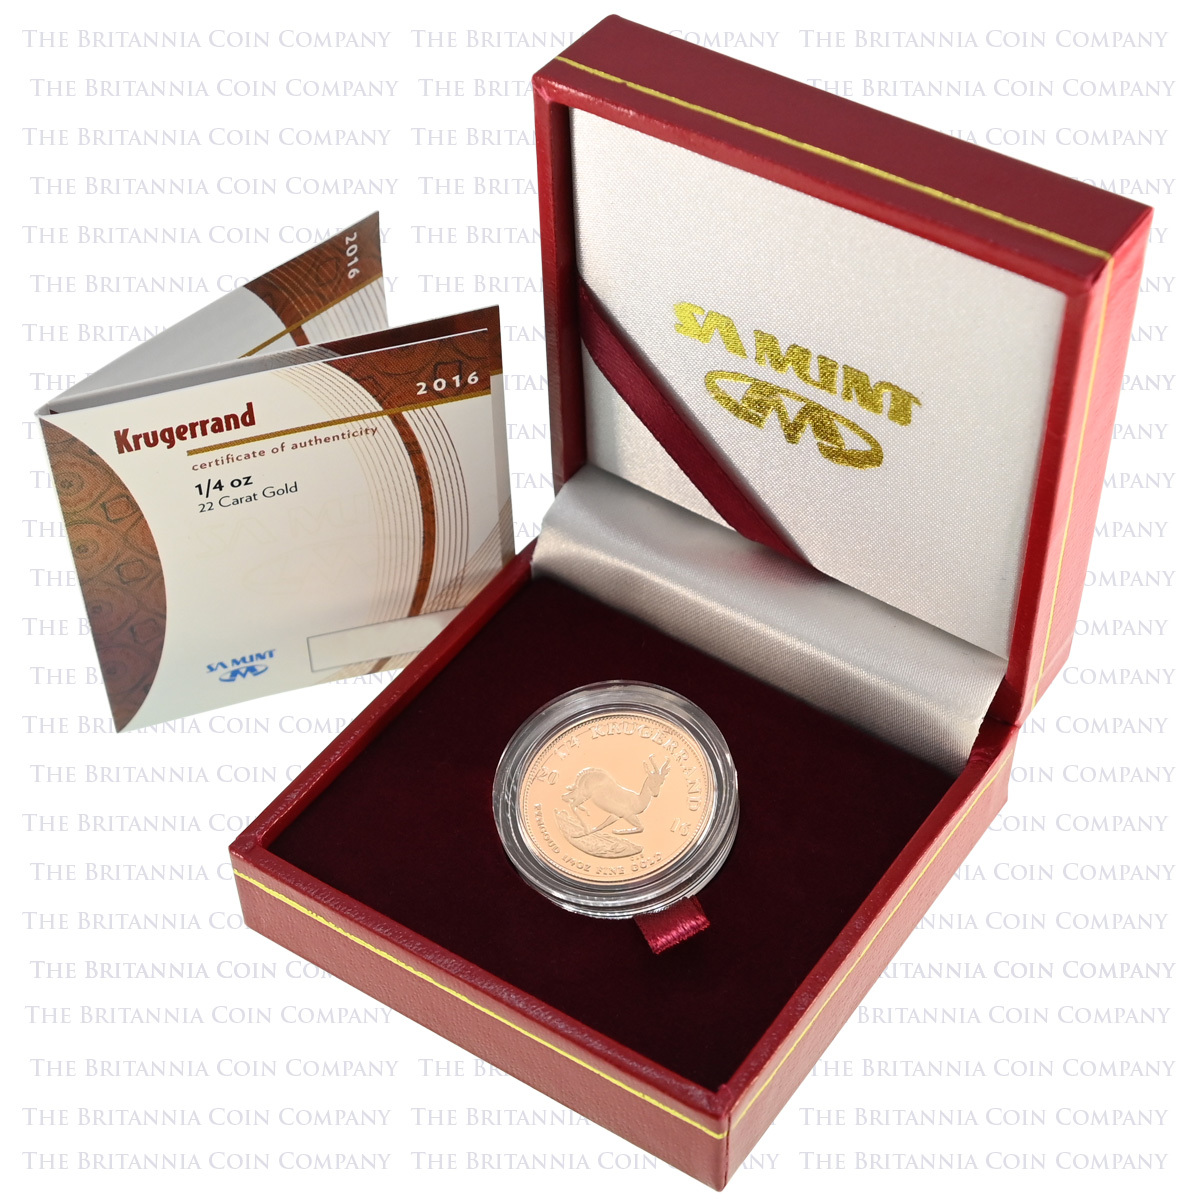 2016 Krugerrand Quarter Ounce Gold Proof South African Coin Boxed